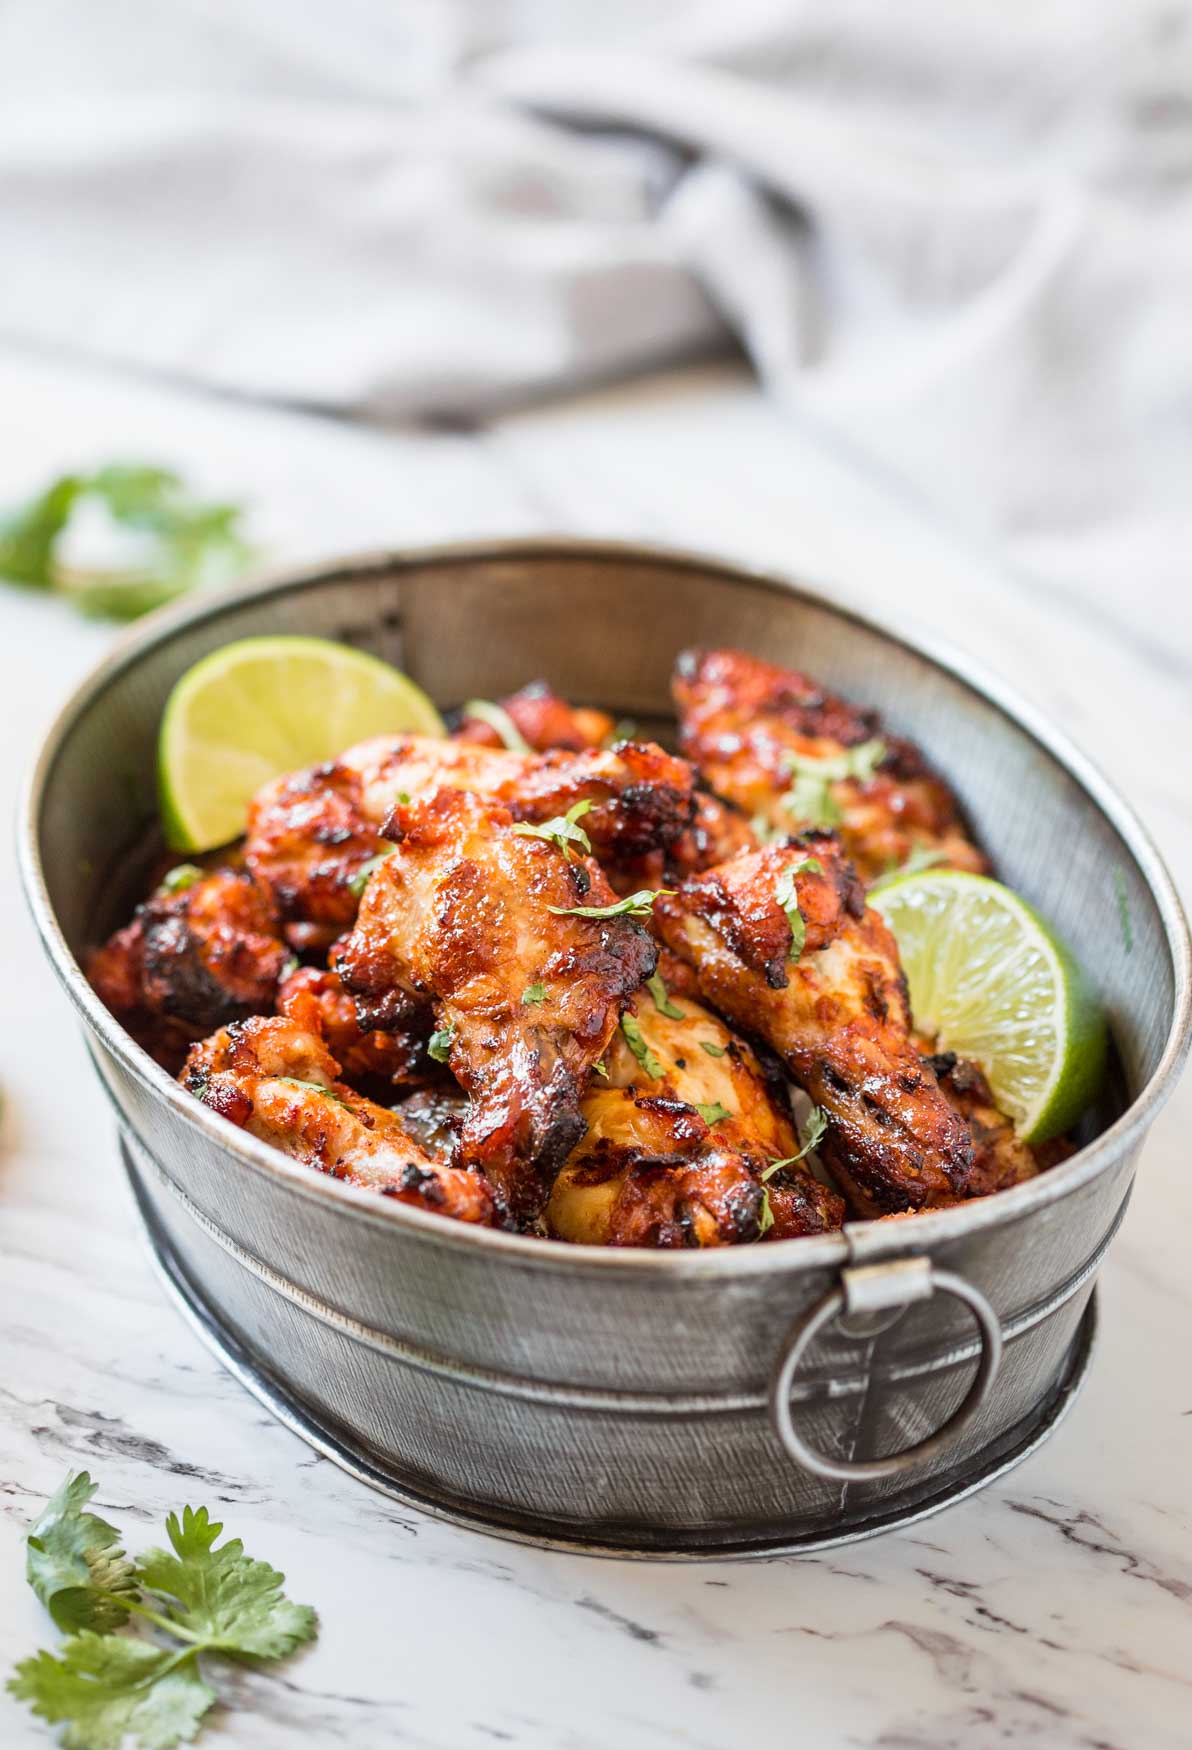 Make these amazingly flavorful grilled Tandoori Chicken Wings when you fire up your grill next time. The smoky taste that develops during grilling make them even more delicious.